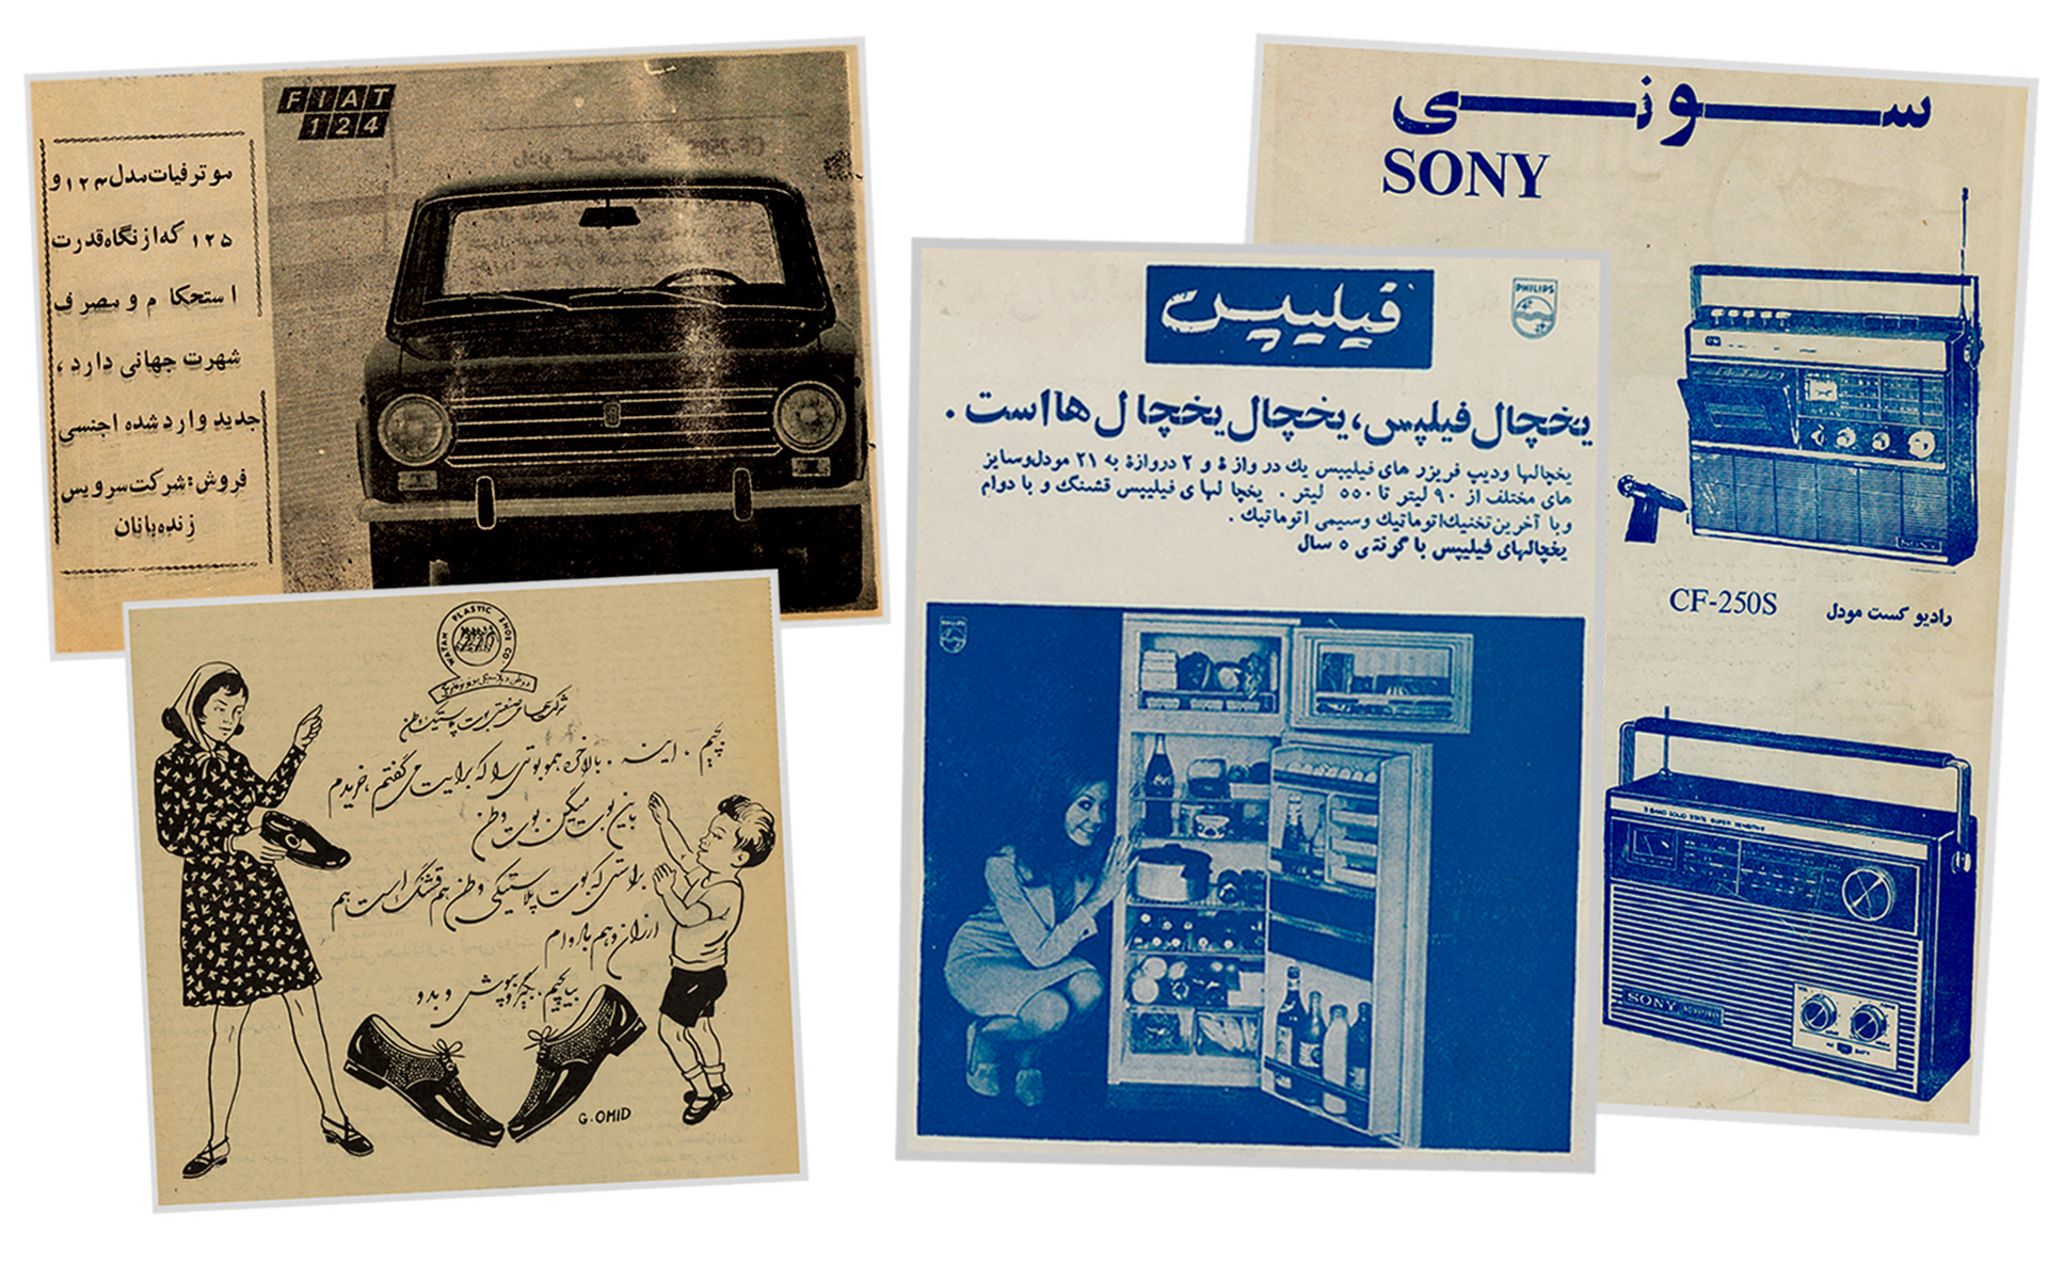 Pages from Afghan magazine Zhvandun - car, shoes, fridge and radio adverts